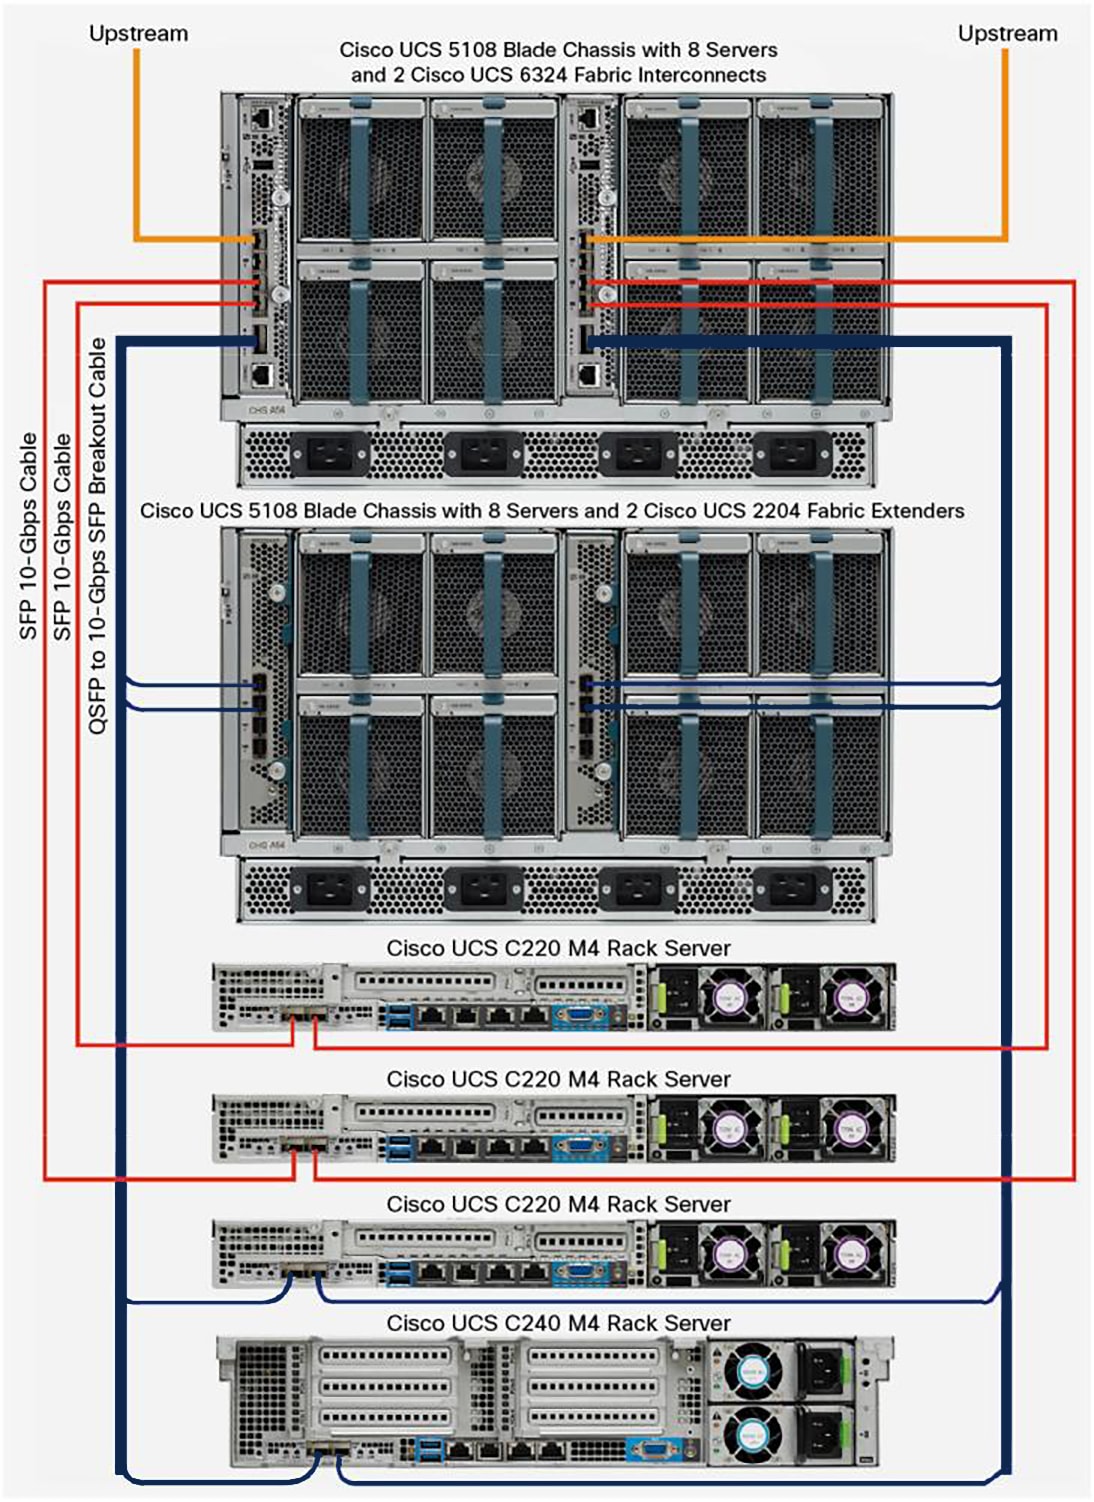 Full Scale Cisco UCS 6324 Fabric Interconnect solution